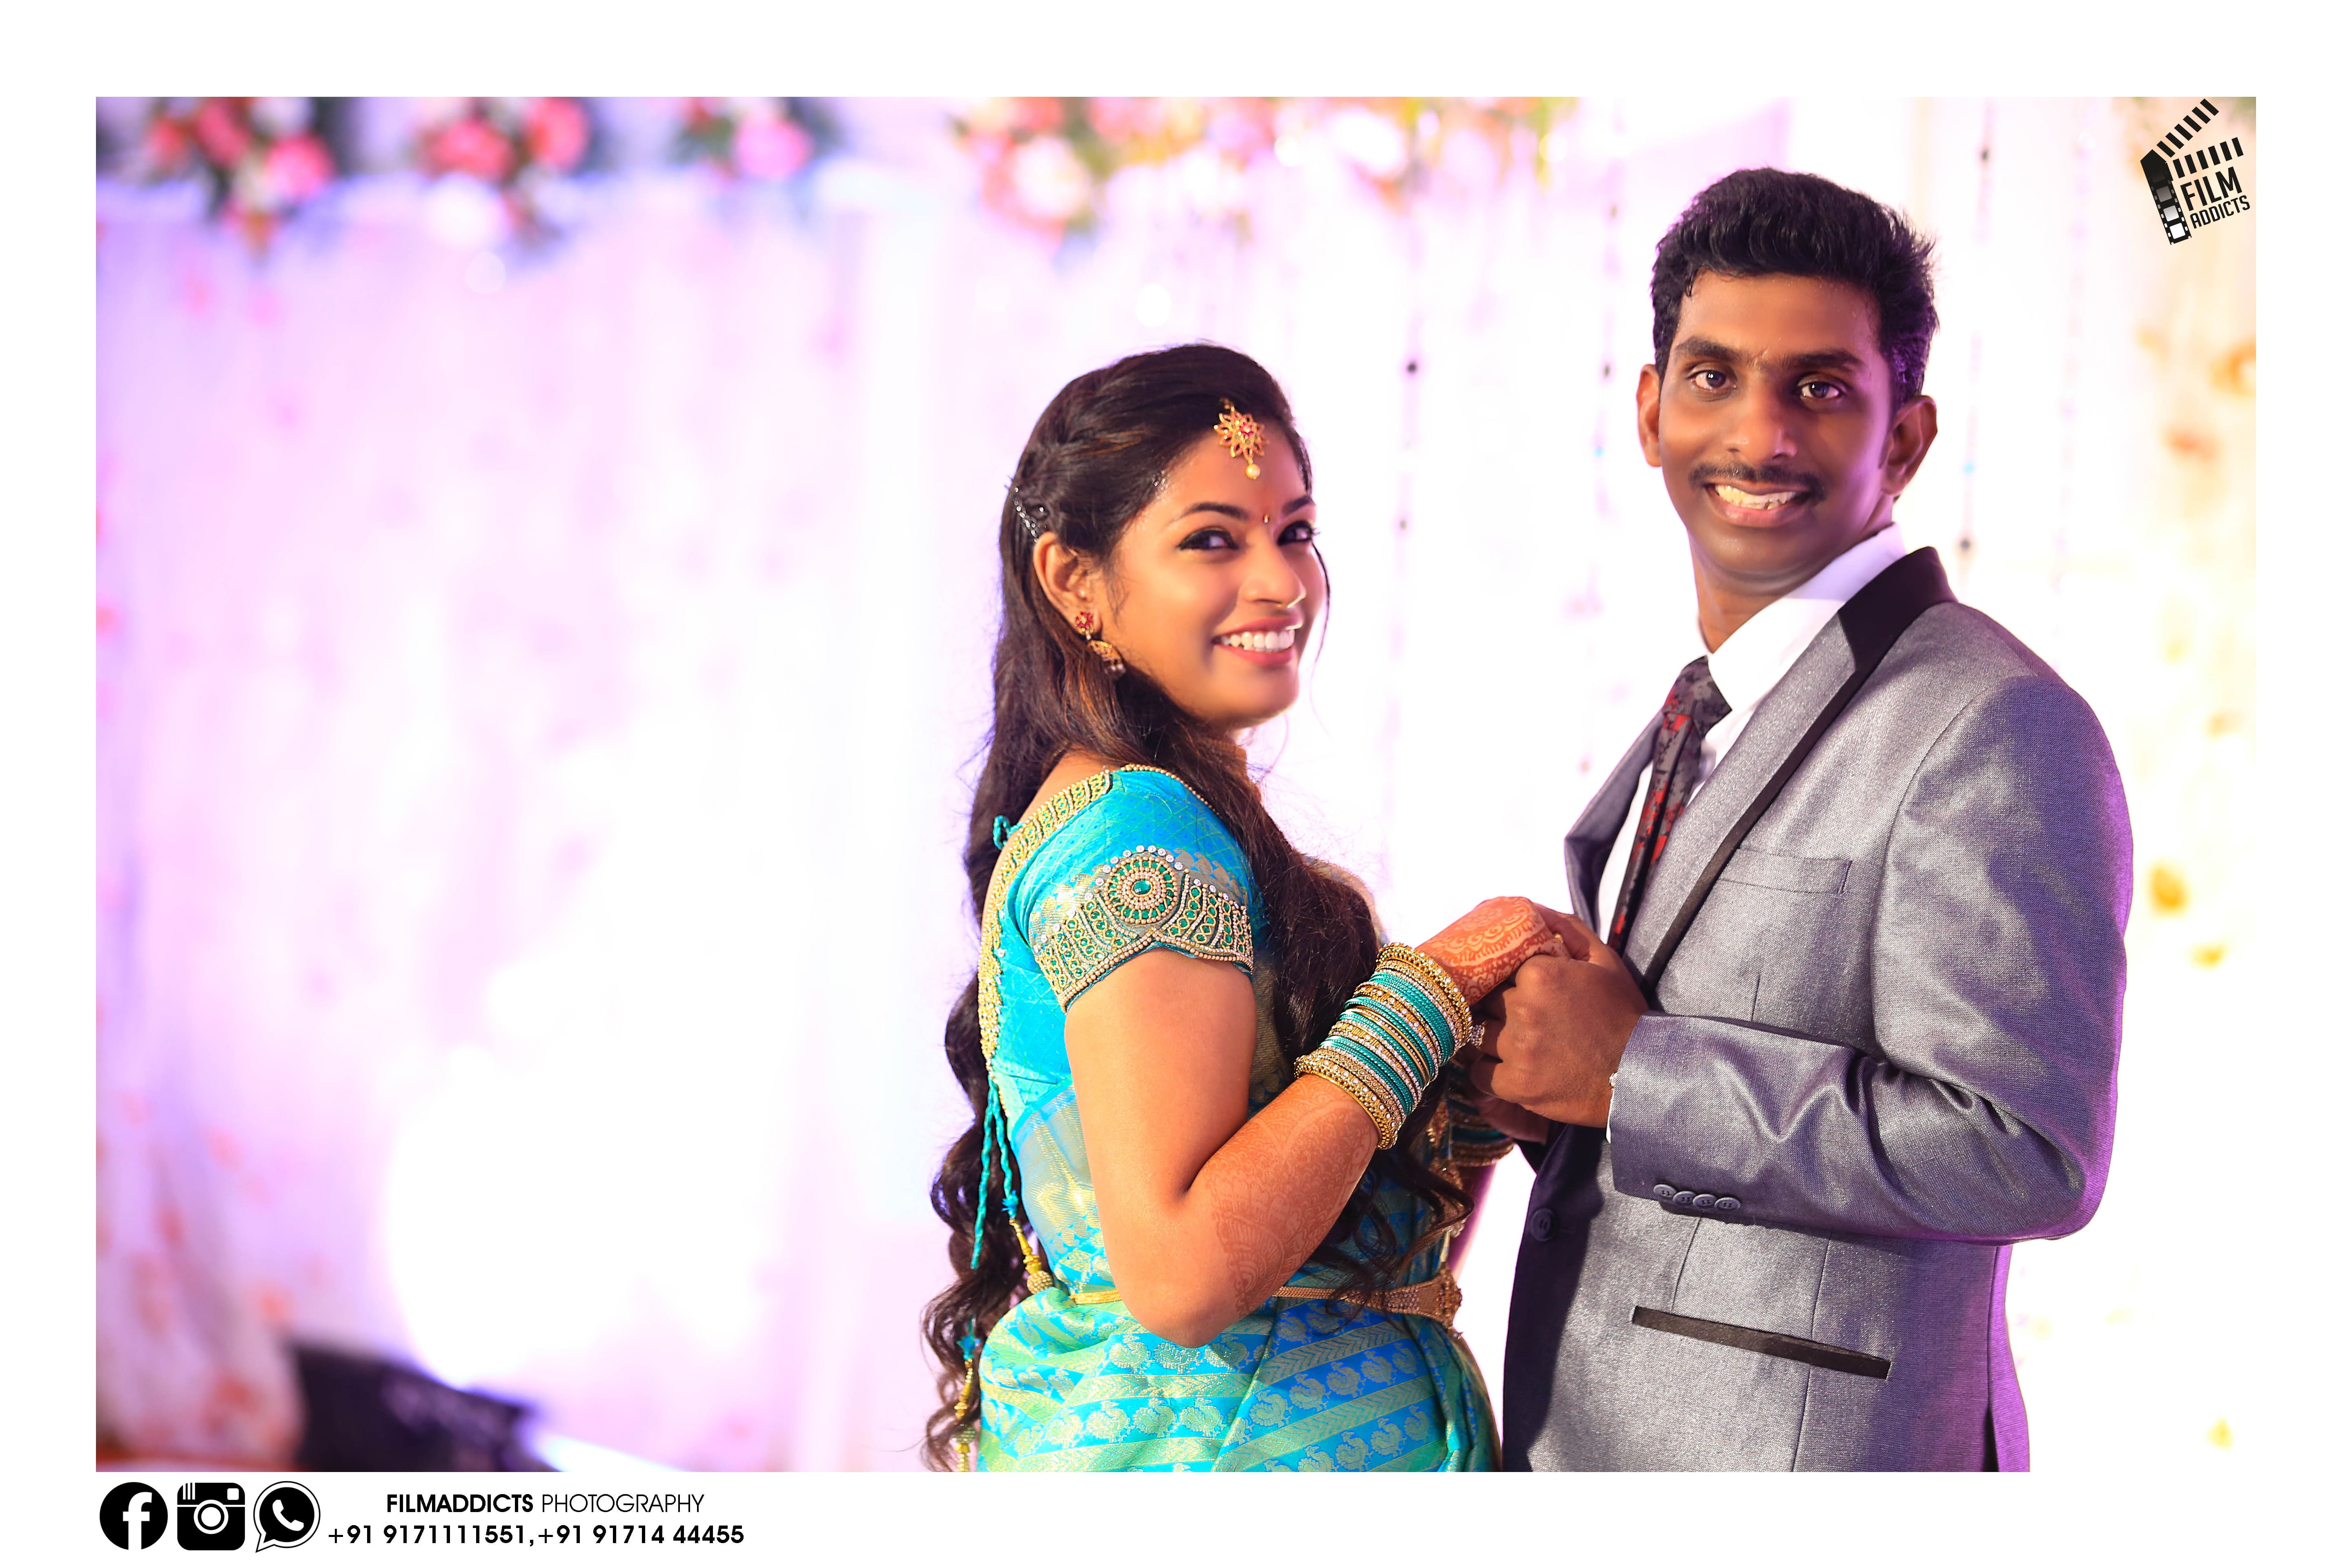 Decoding Tamil Wedding: The traditions and the rituals in all its fervour |  Zero Gravity Photography